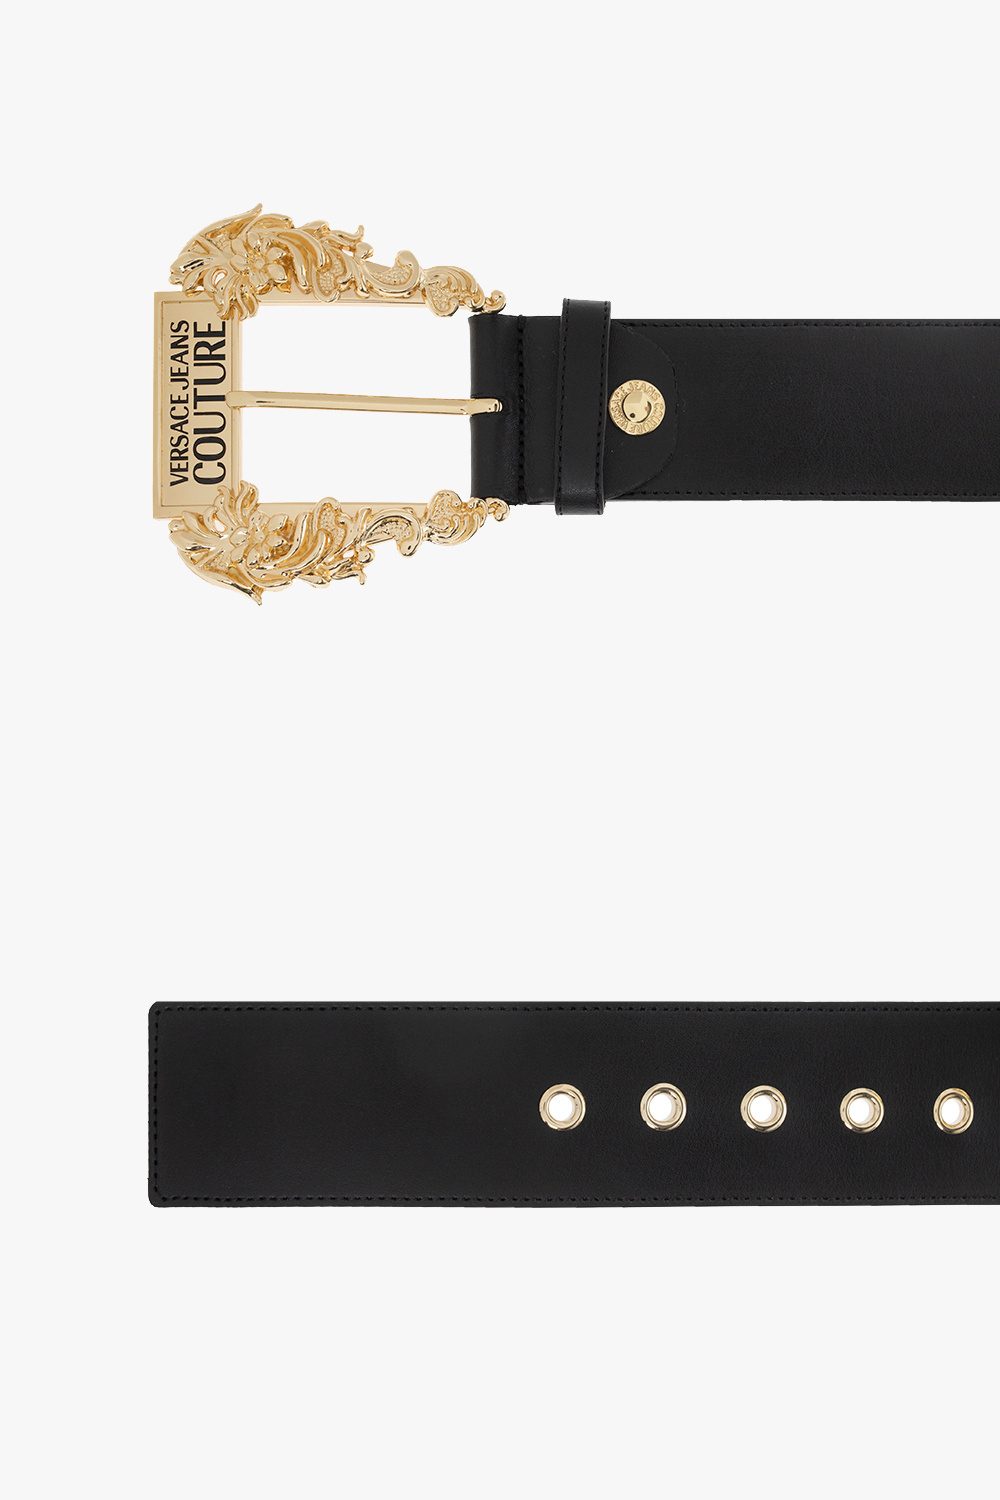 Versace Classic Medusa Belt Black in Leather with Gold-tone - GB